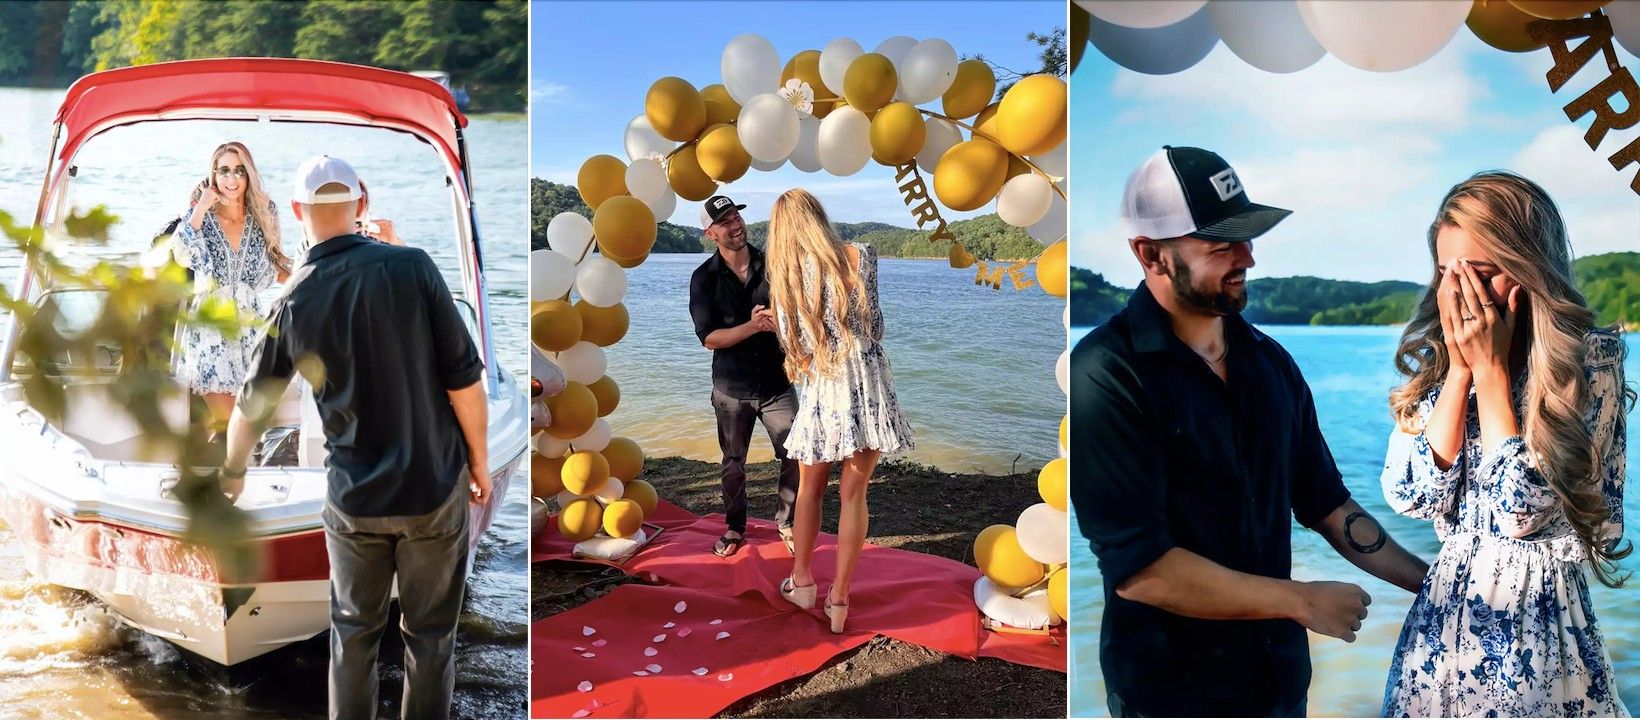 Country Music Artists Gary Wayne and Ali Taylor Are Engaged—Check Out Her Oval-Cut Sparkler! image1